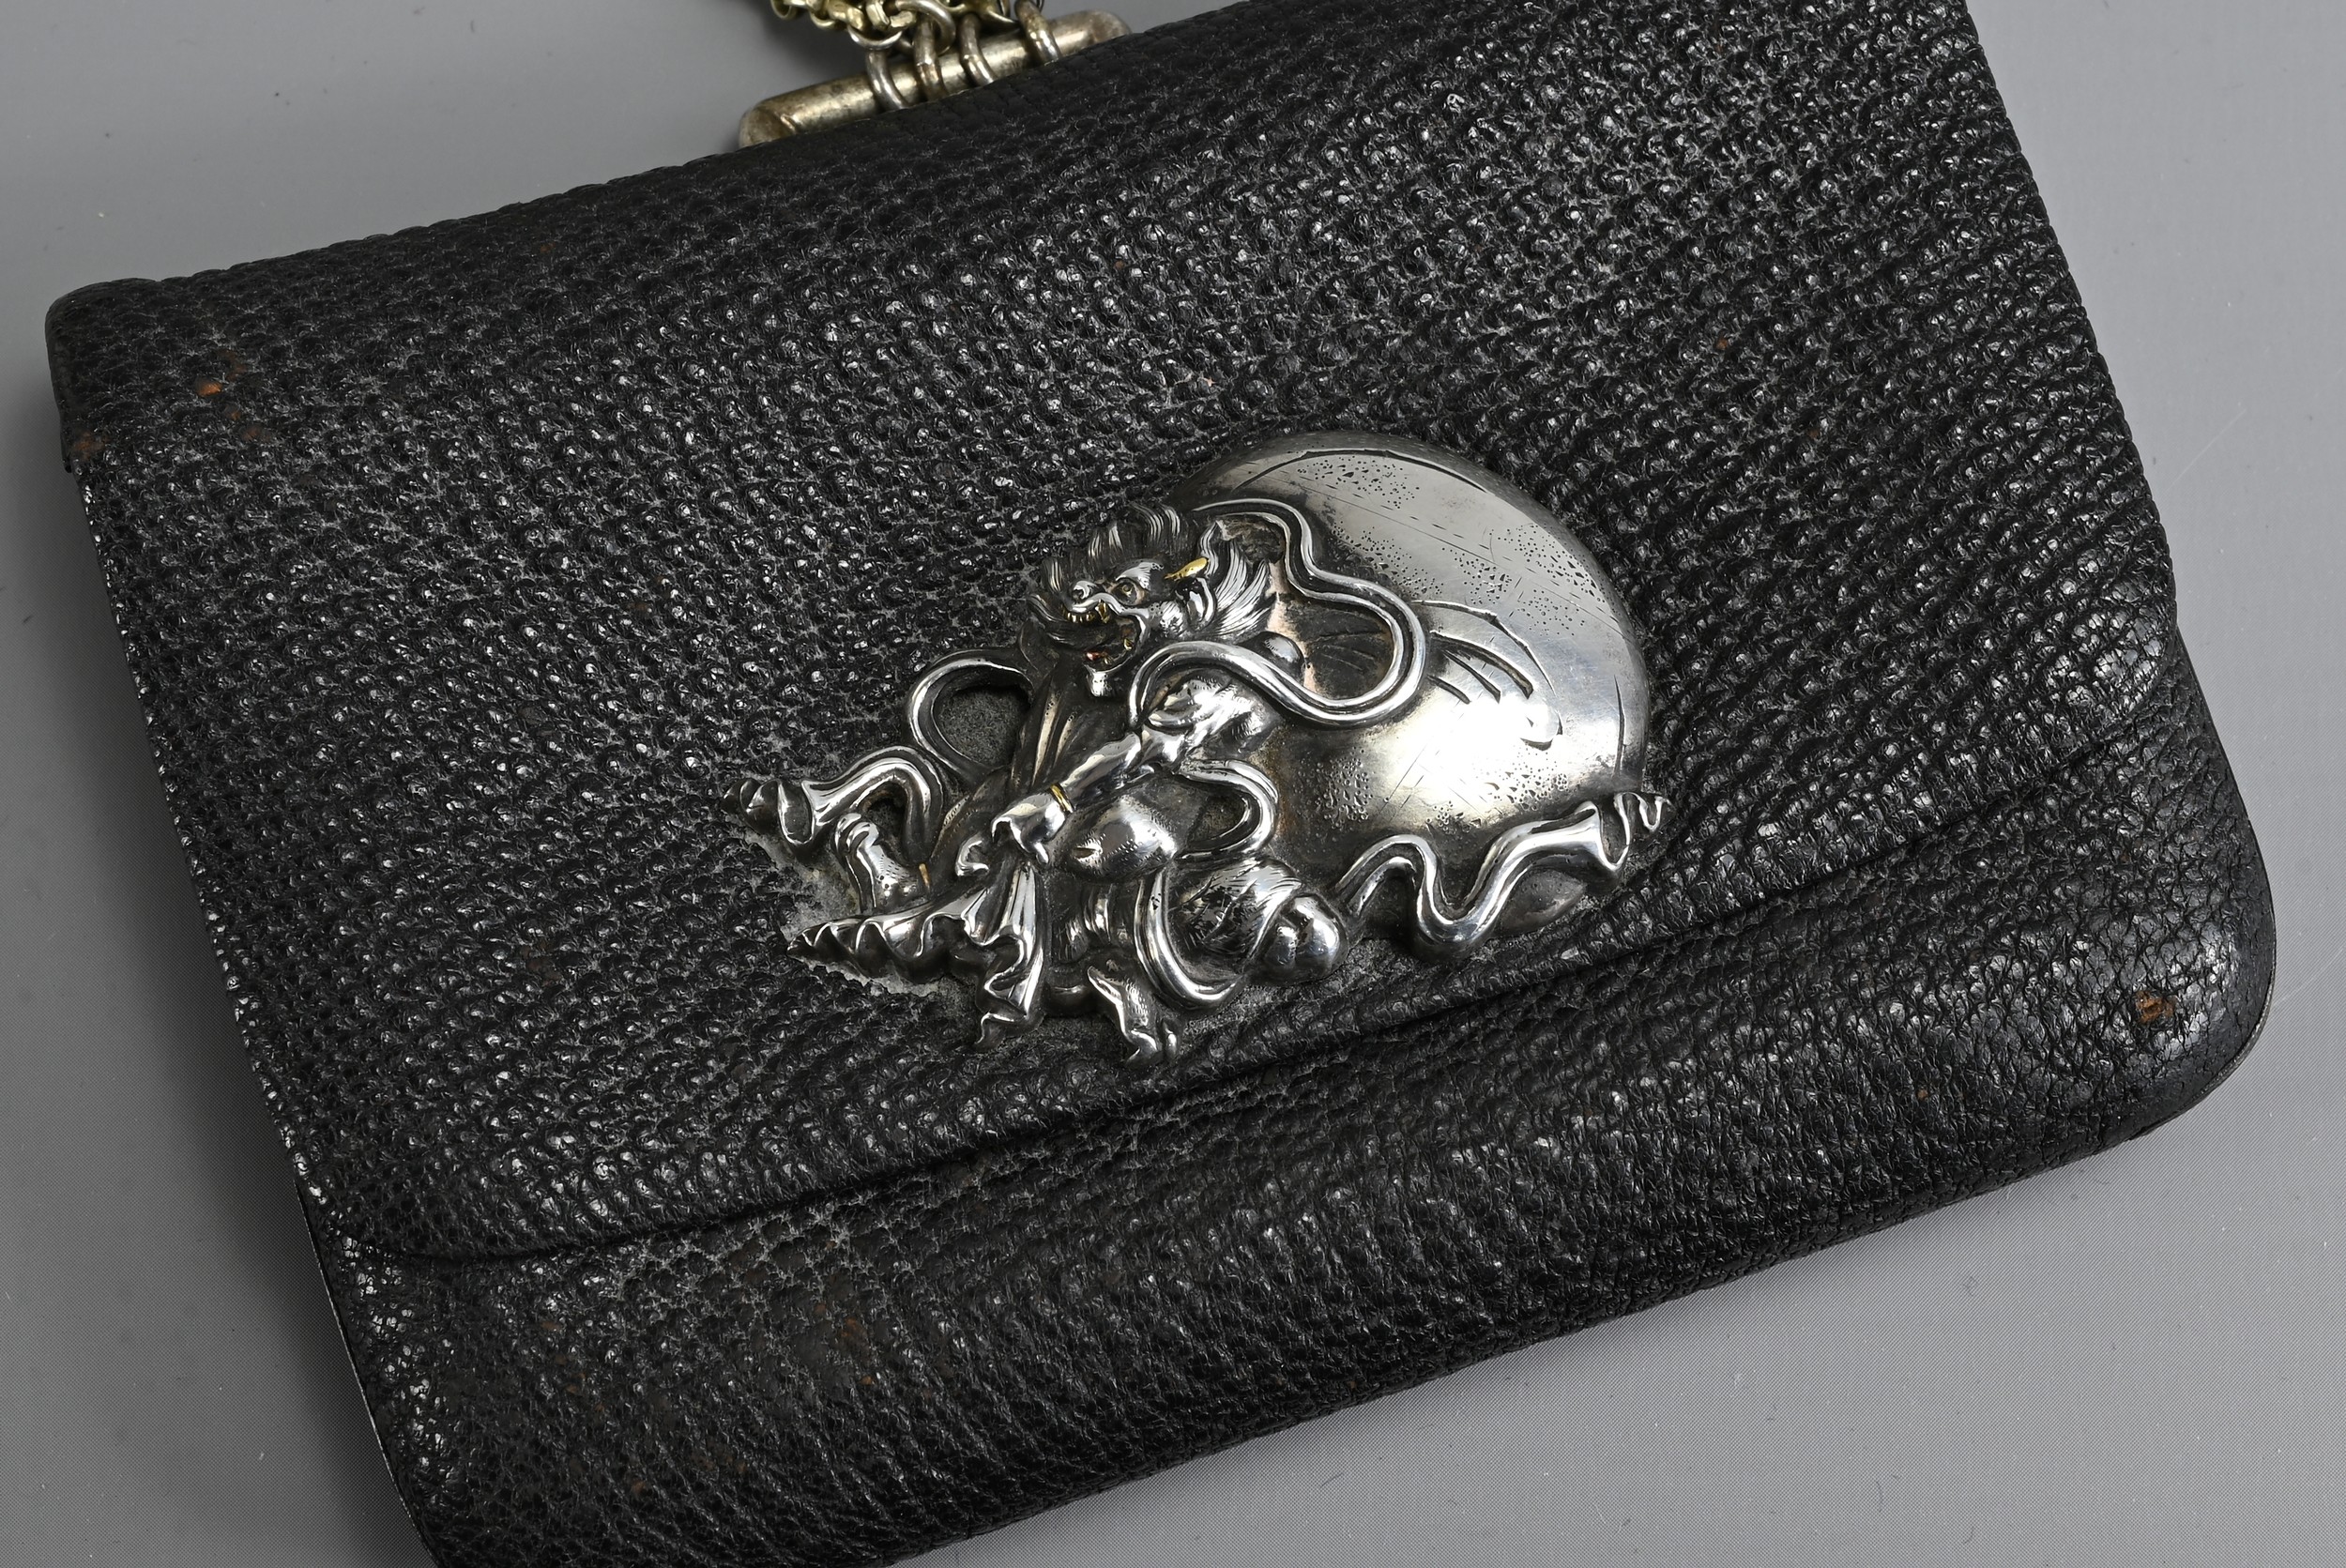 A JAPANESE MEIJI PERIOD (1868-1912) BLACK LEATHER COIN POUCH (FUKURO) WITH SILVER-COLOURED METAL - Image 2 of 6